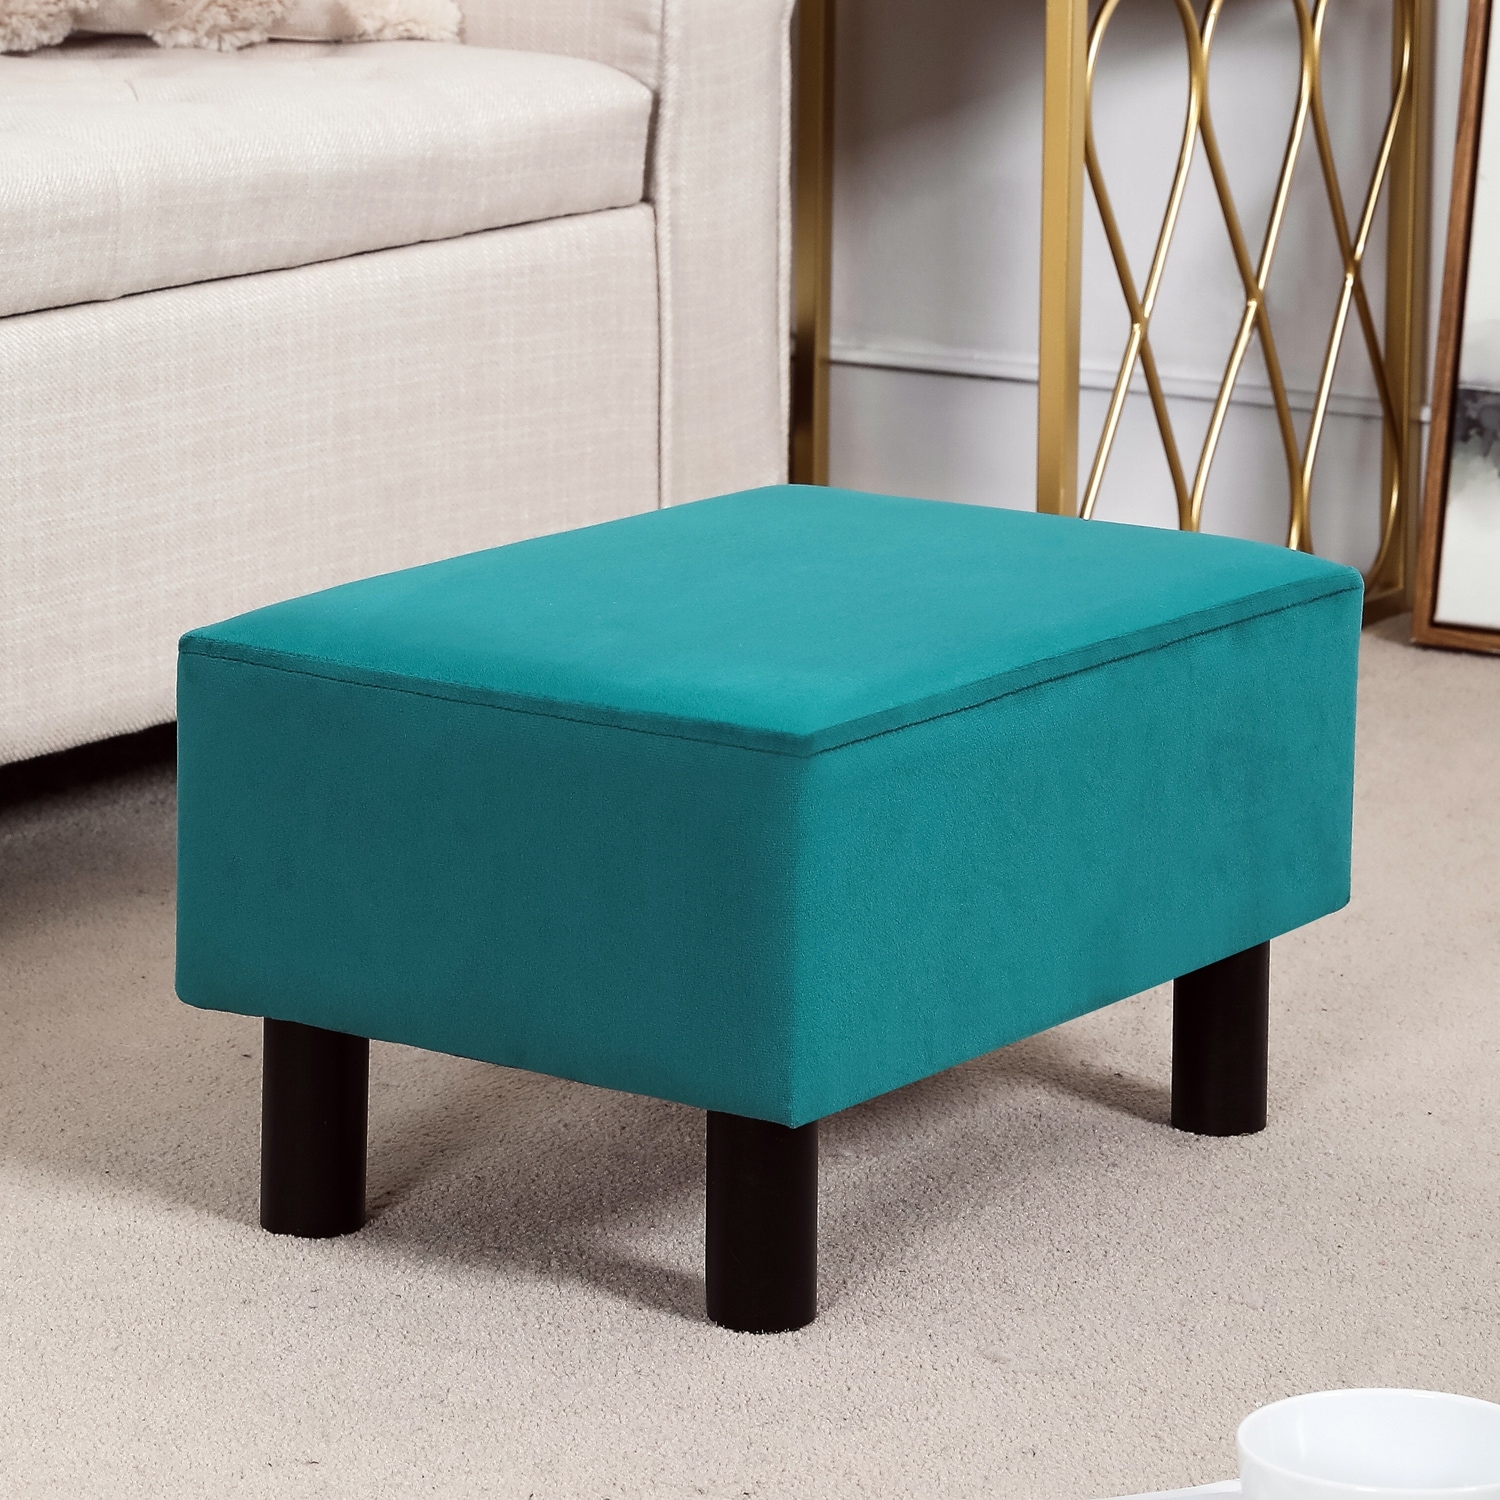 https://ak1.ostkcdn.com/images/products/is/images/direct/0d70523d0f564d33fe32d08596740870f543e2e7/Adeco-Footstool-Ottoman-Faux-Leather-Foot-Rest-Stool.jpg